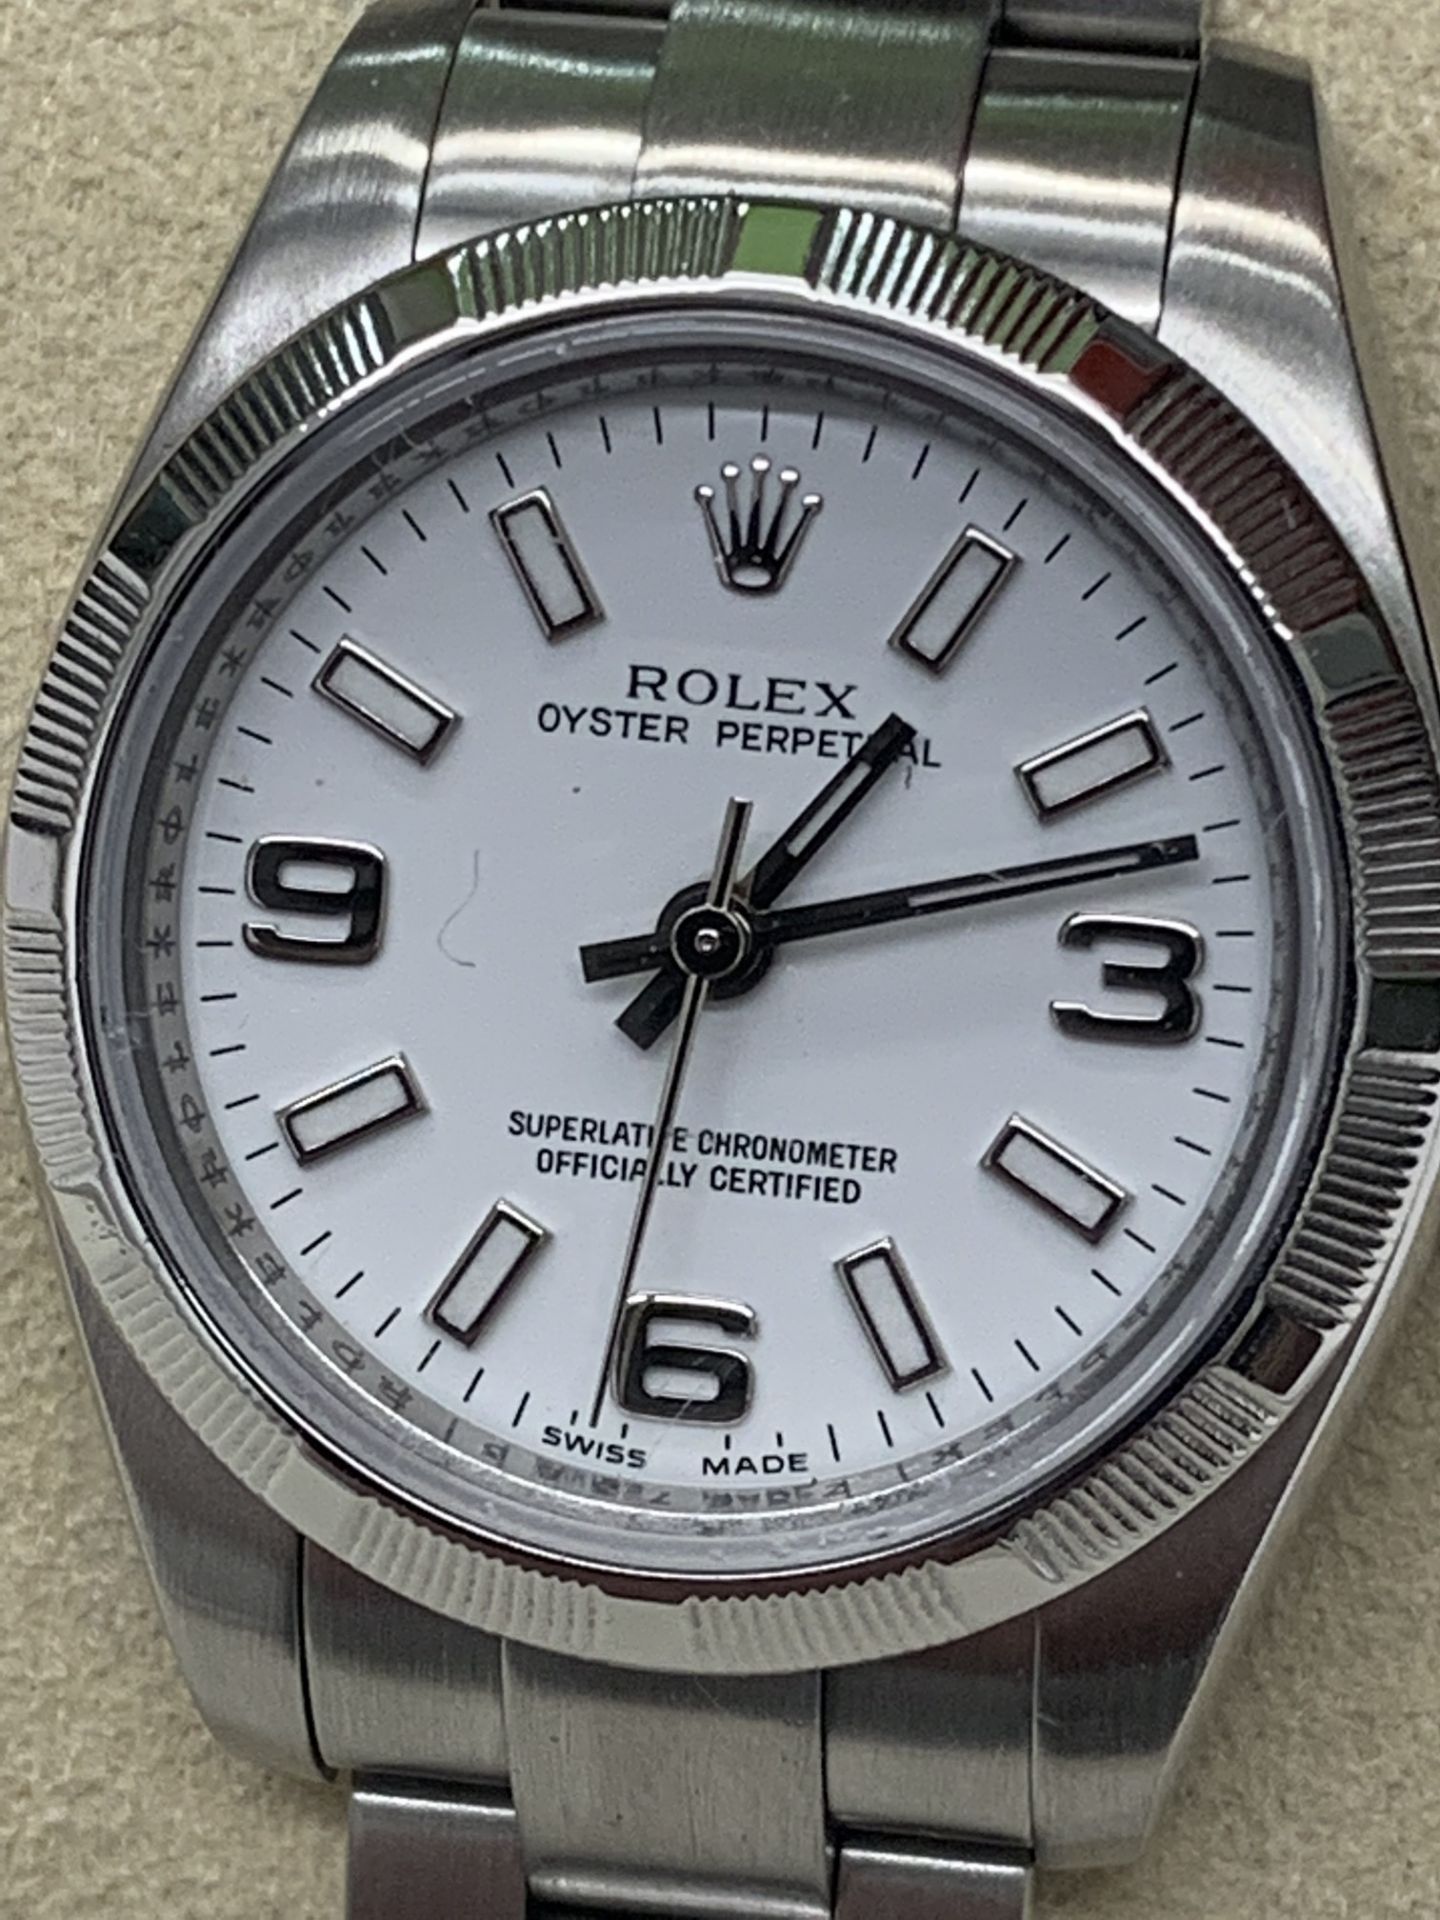 APPROX 2006 ROLEX STAINLESS STEEL WATCH